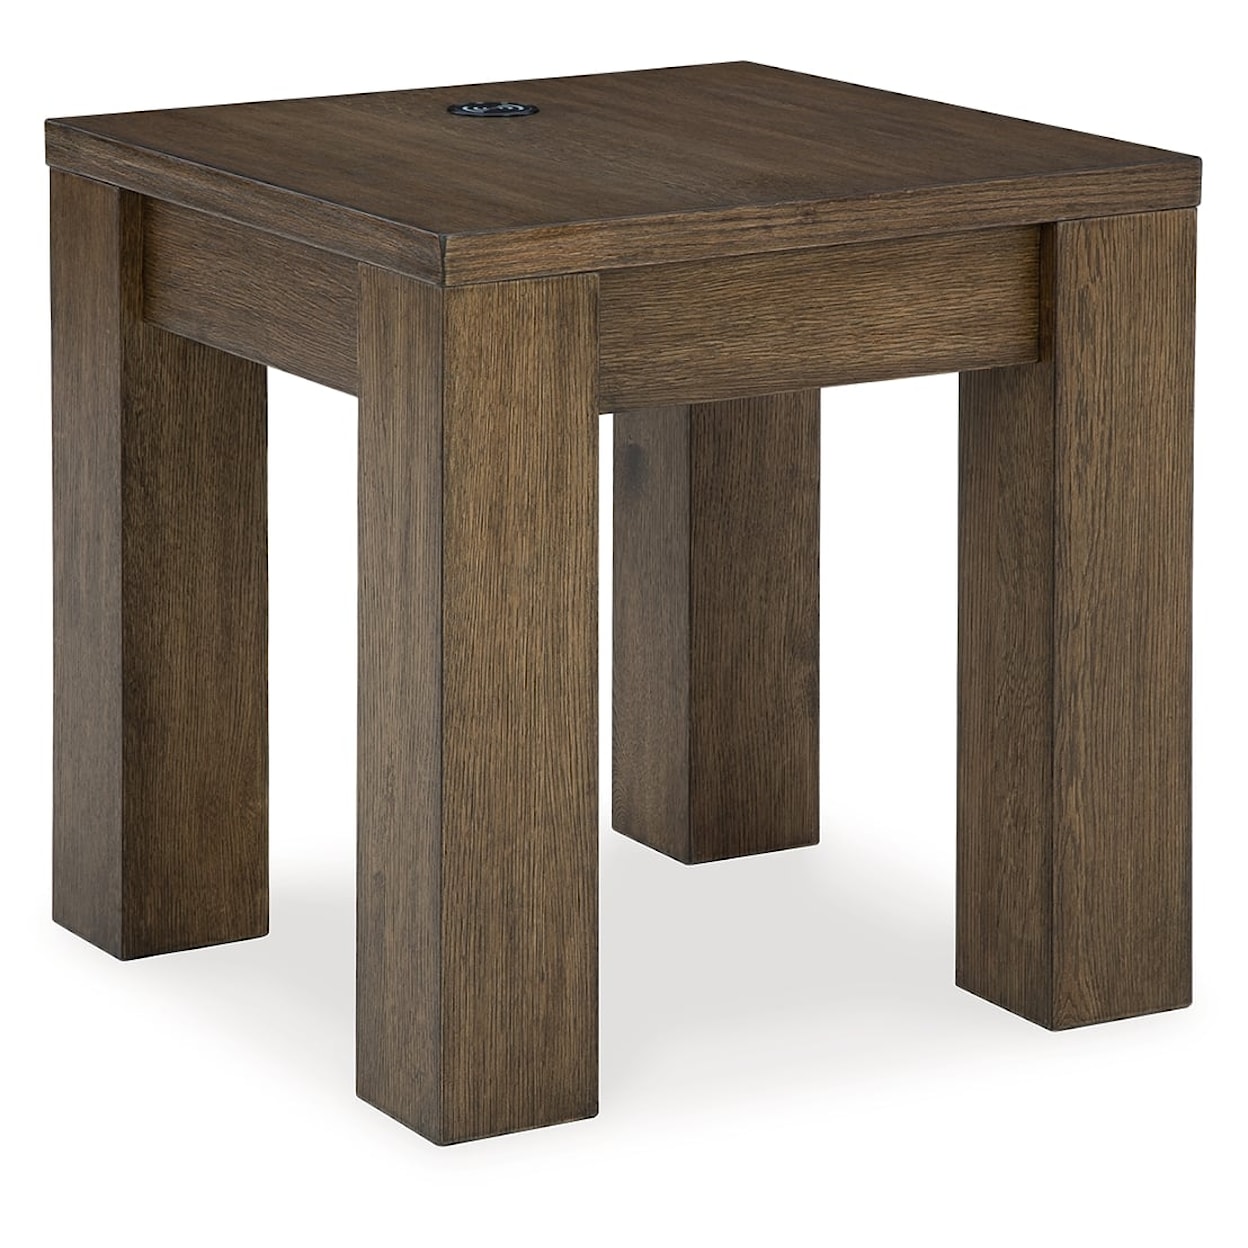 Benchcraft Rosswain Square End Table